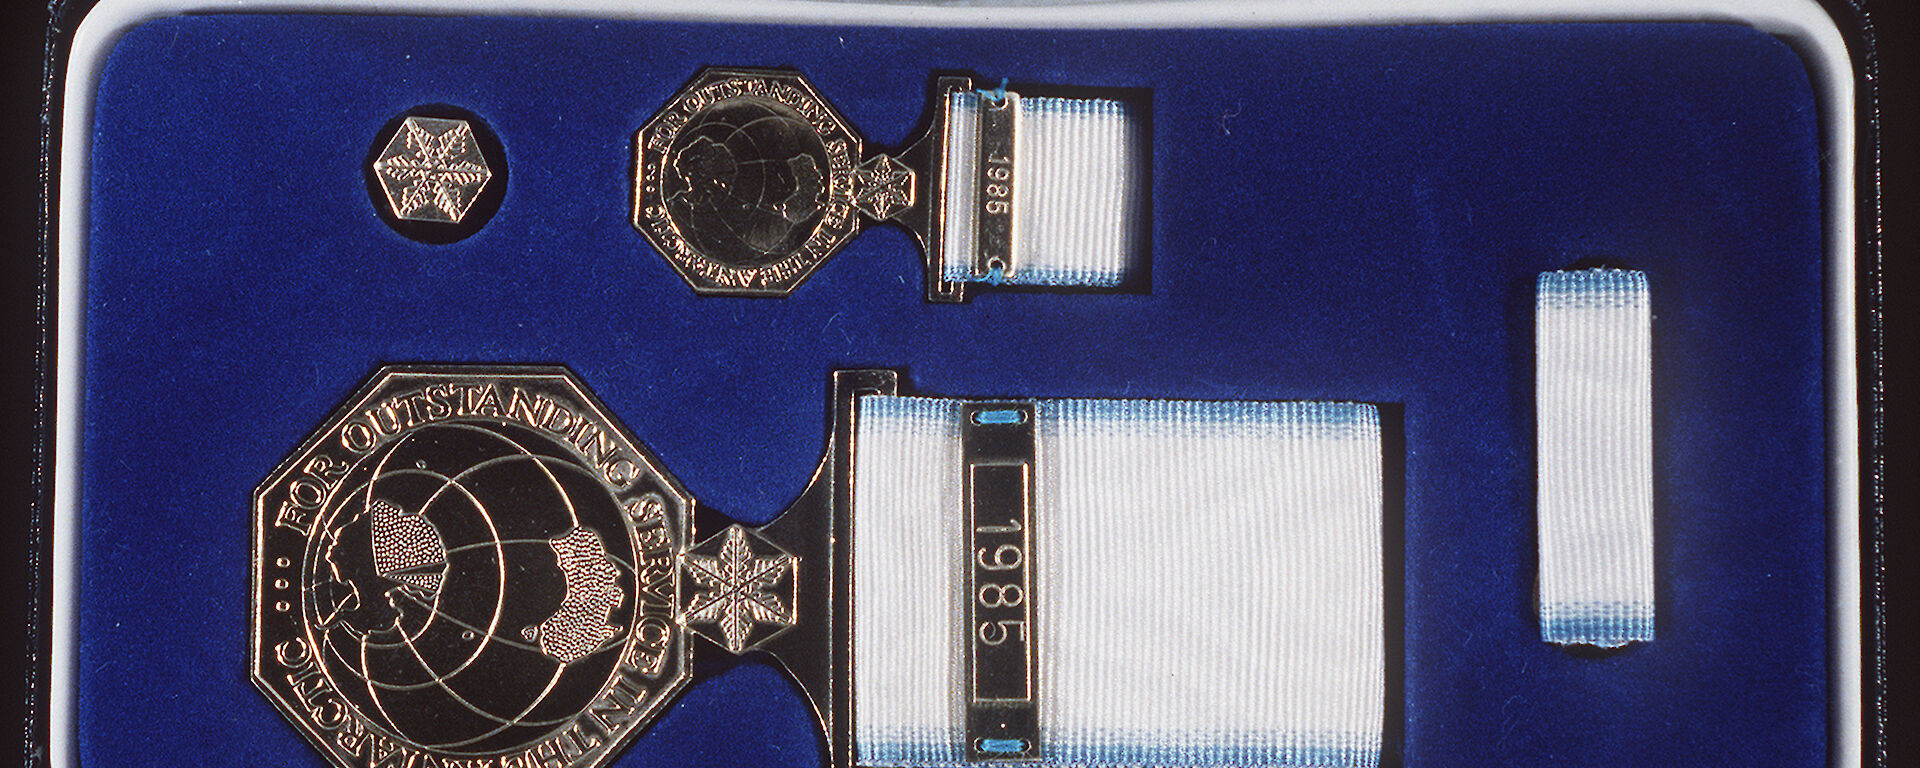 The Australian Antarctic Medal is presented in a box containing: a ‘ribbon bar’, for those in the uniformed services to wear on their uniforms; a miniature medal for wearing with formal evening dress; a lapel badge for everyday wear; and the full-sized medal for wearing on appropriate occasions during the day. The full sized medal has the recipient’s name stamped on the rim.